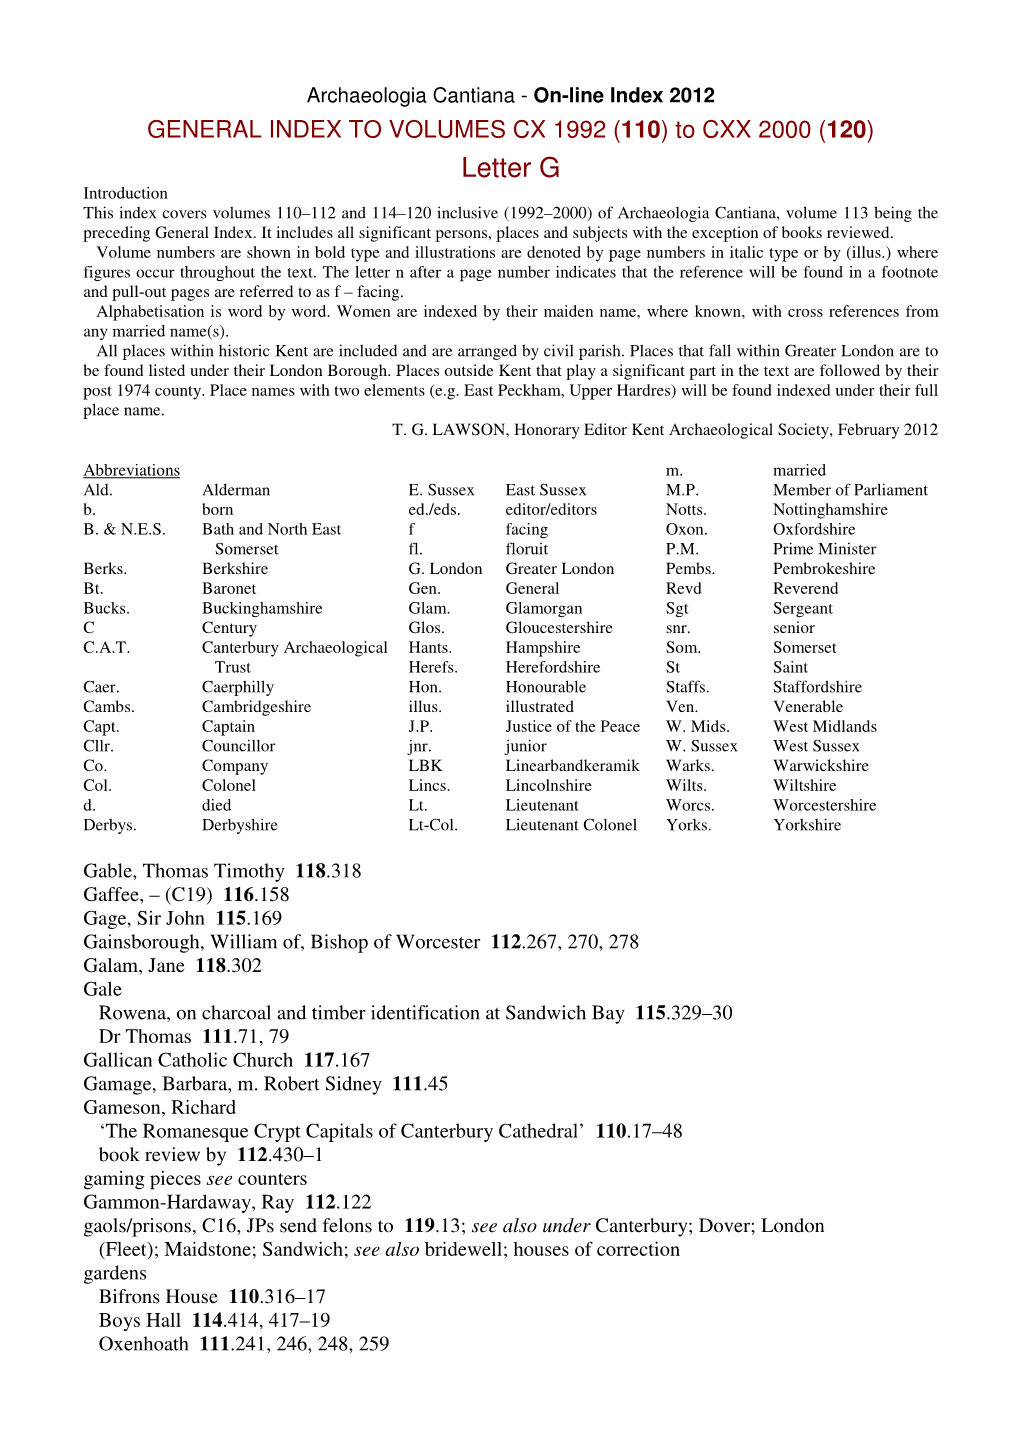 Letter G Introduction This Index Covers Volumes 110–112 and 114–120 Inclusive (1992–2000) of Archaeologia Cantiana, Volume 113 Being the Preceding General Index